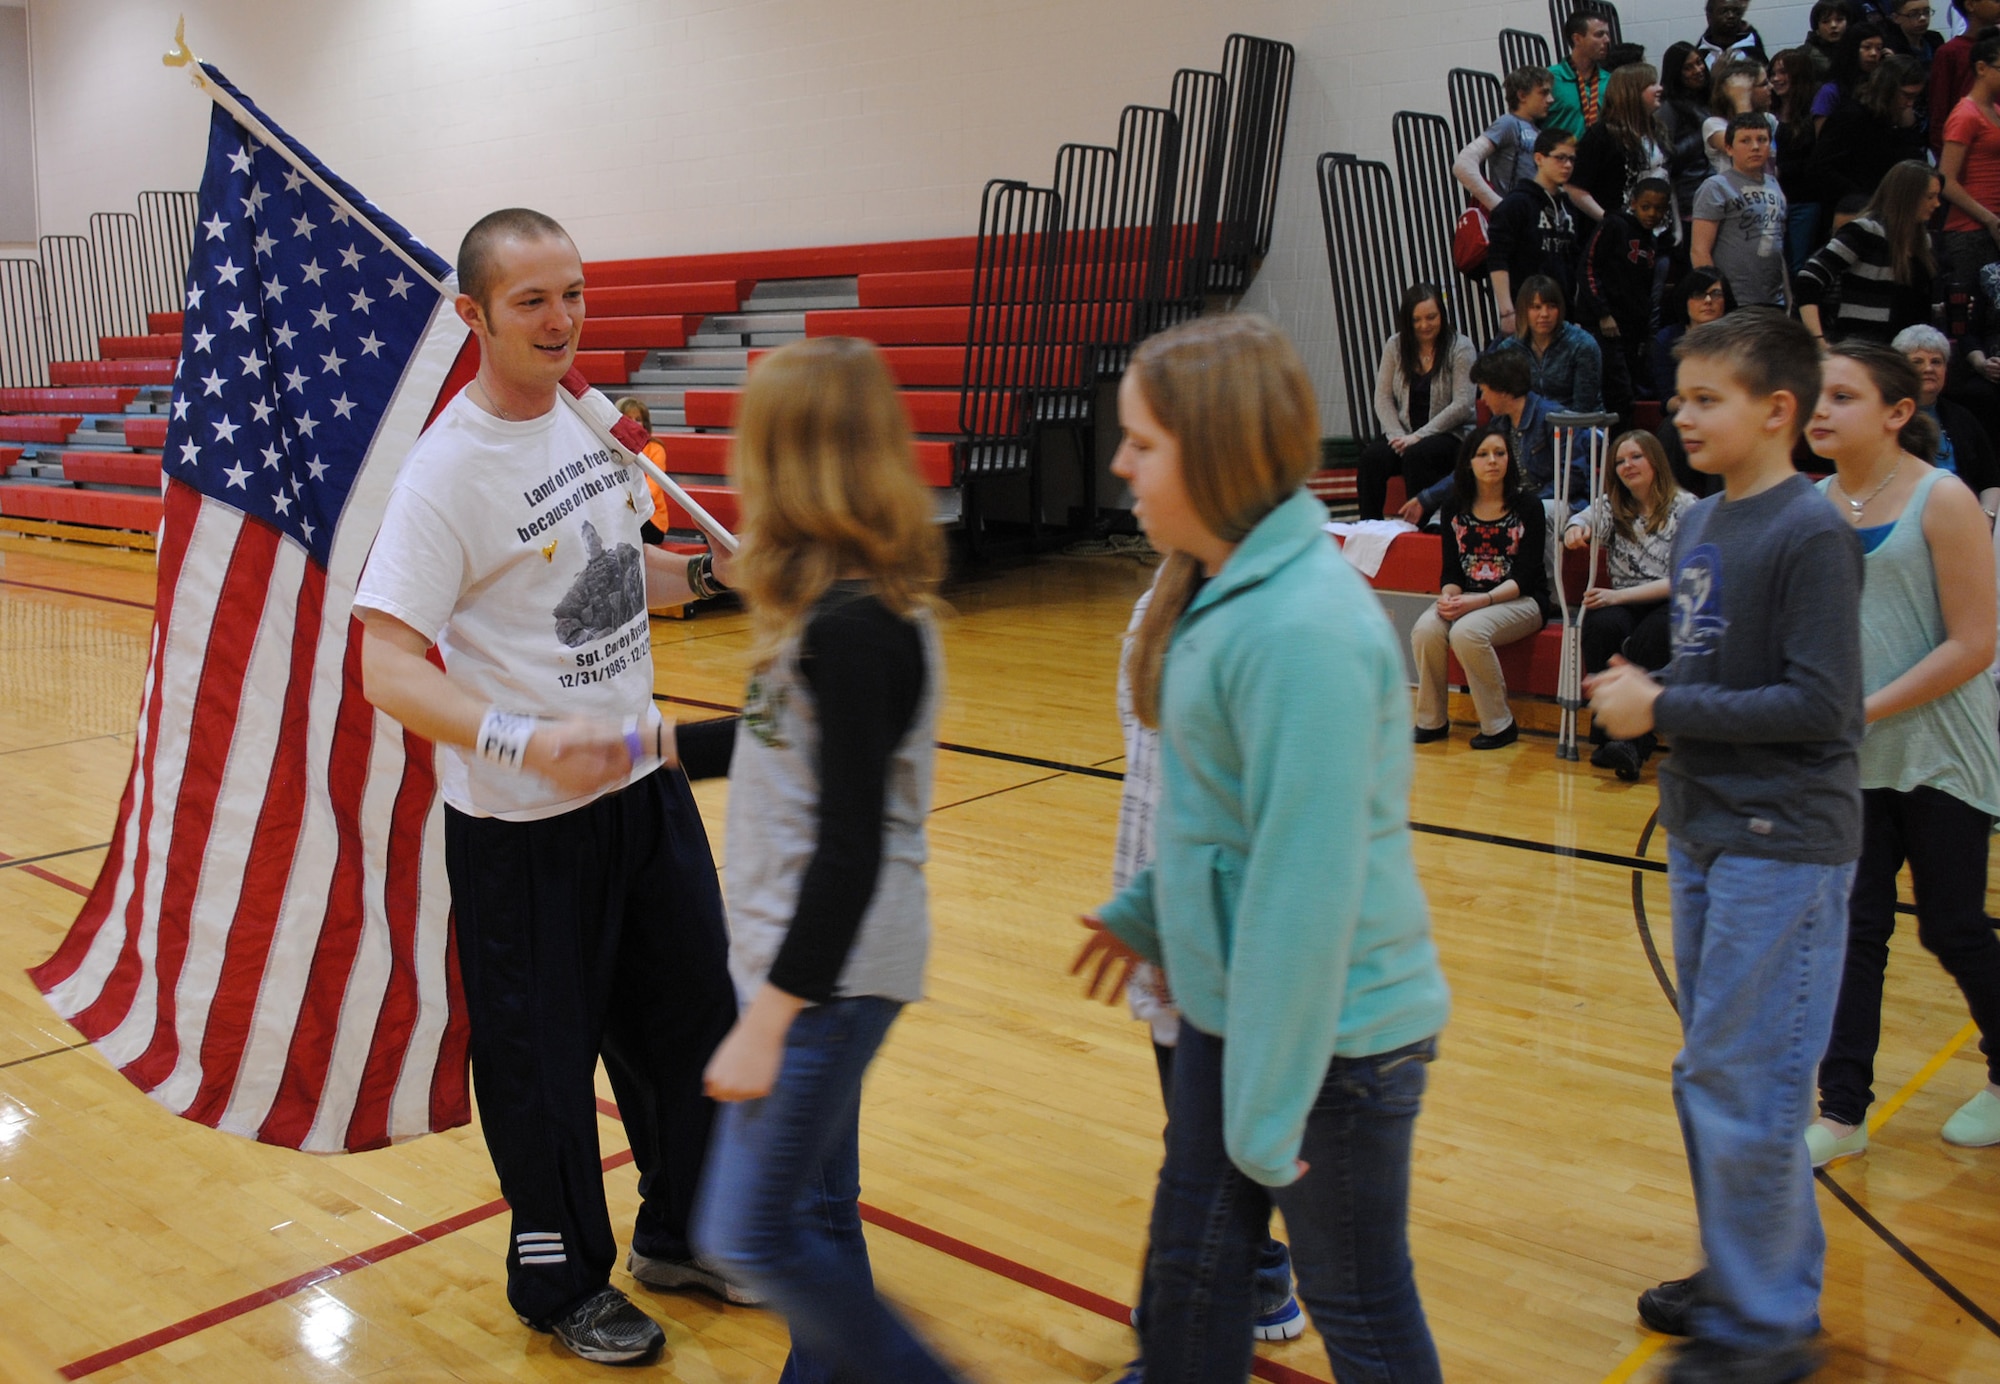 Kurt Philion greets audience members after delivering a speech about how the death of his friend, an Army sergeant, inspires him to keep running marathons and other races during a March 25, 2013, visit at to Nathan Twining Elementary on Grand Forks Air Force Base, N.D. Philion runs in competitive races in memory of his friend, Sgt. Corey Rystad, who was killed in Iraq in 2006. (U.S. Air Force photo/Staff Sgt. Luis Loza Gutierrez)